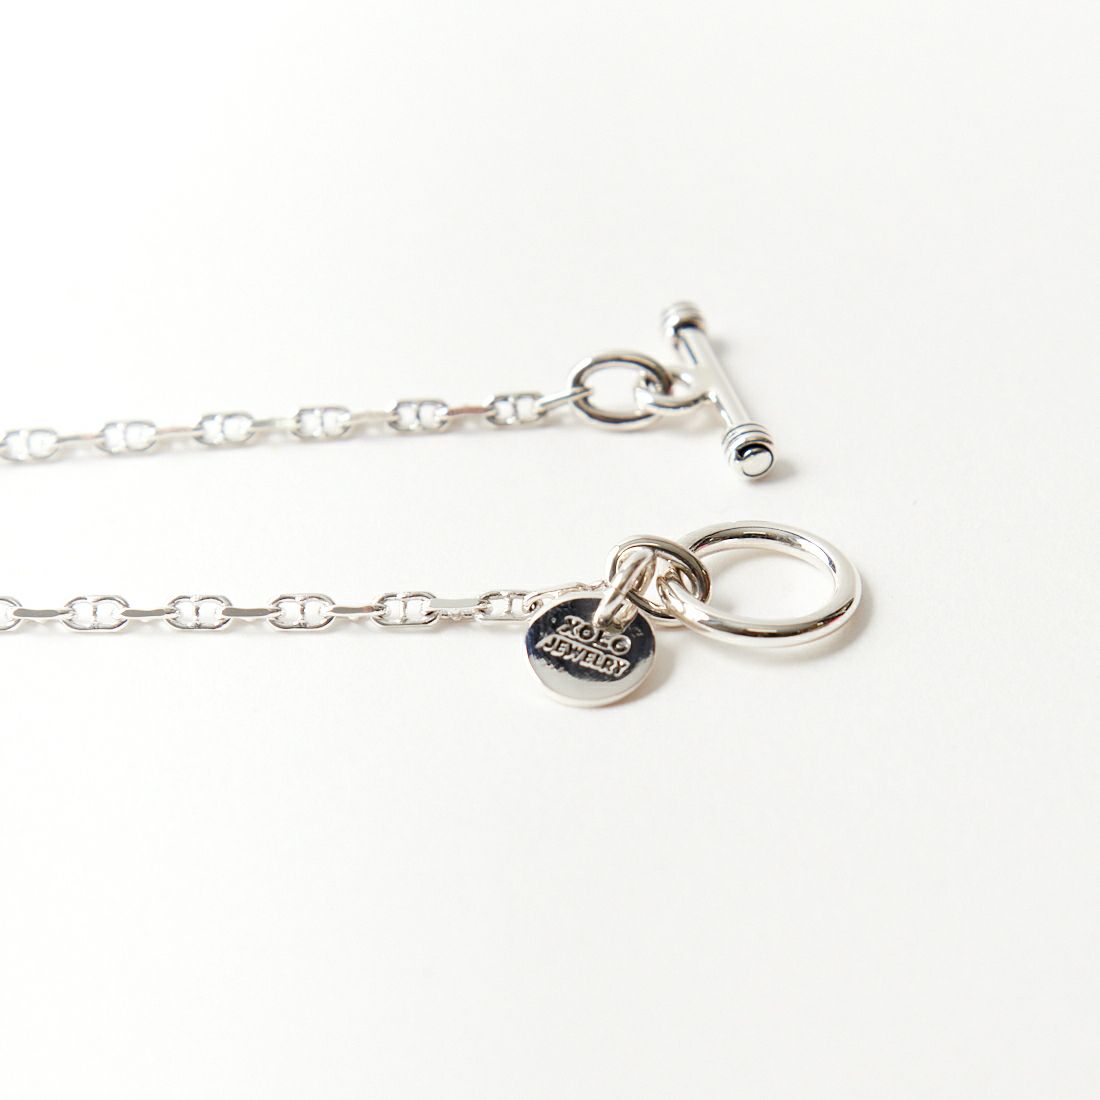 XOLO JEWELRY [ショロジュエリー] SOLID ANCHOR LINKネックレス [XON019-60] SILVER